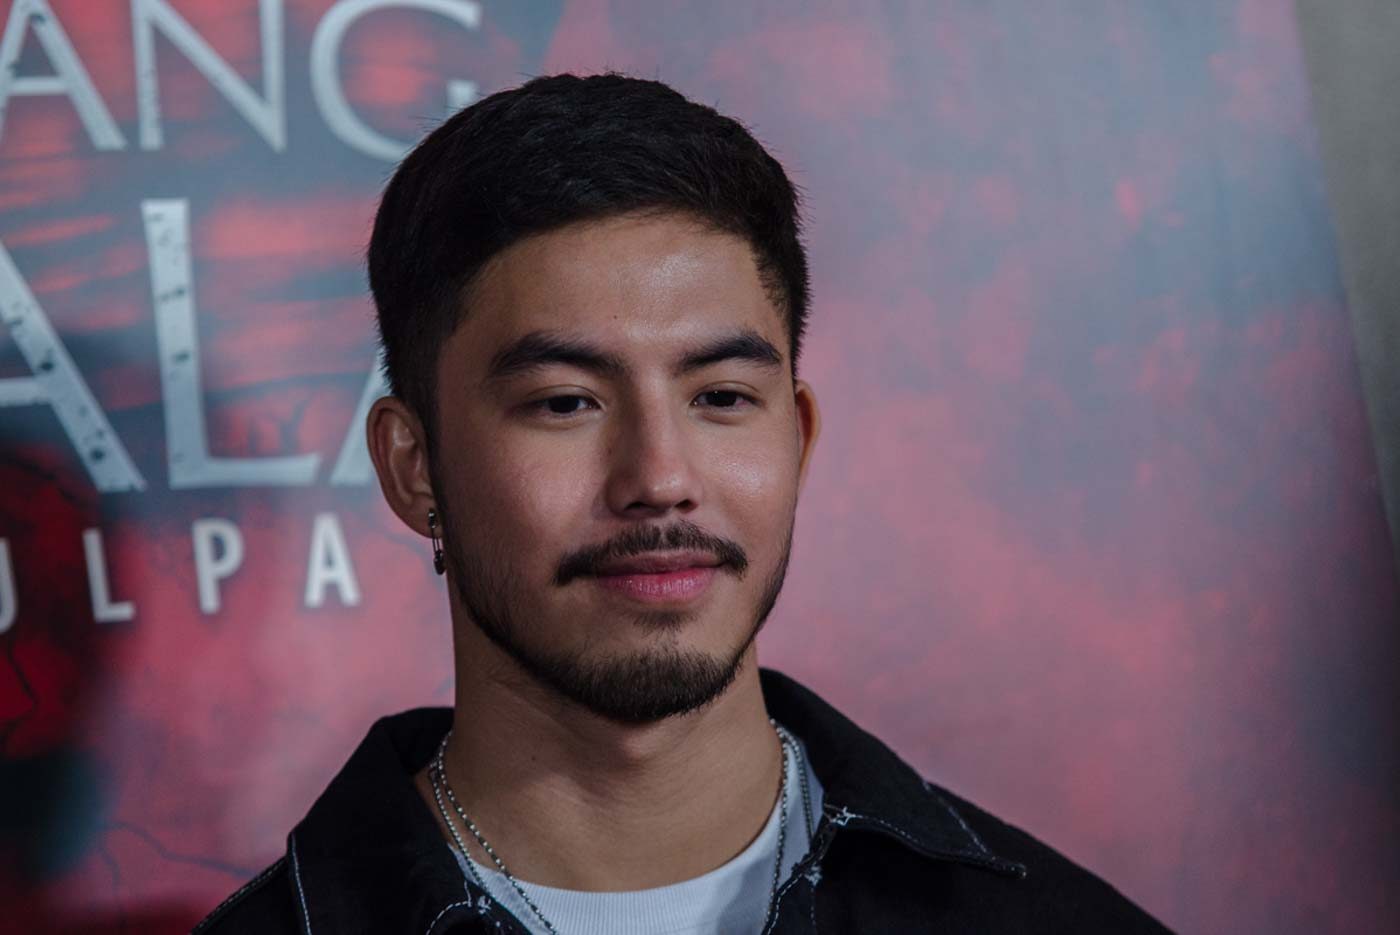 Tony Labrusca admits he has anger management issues